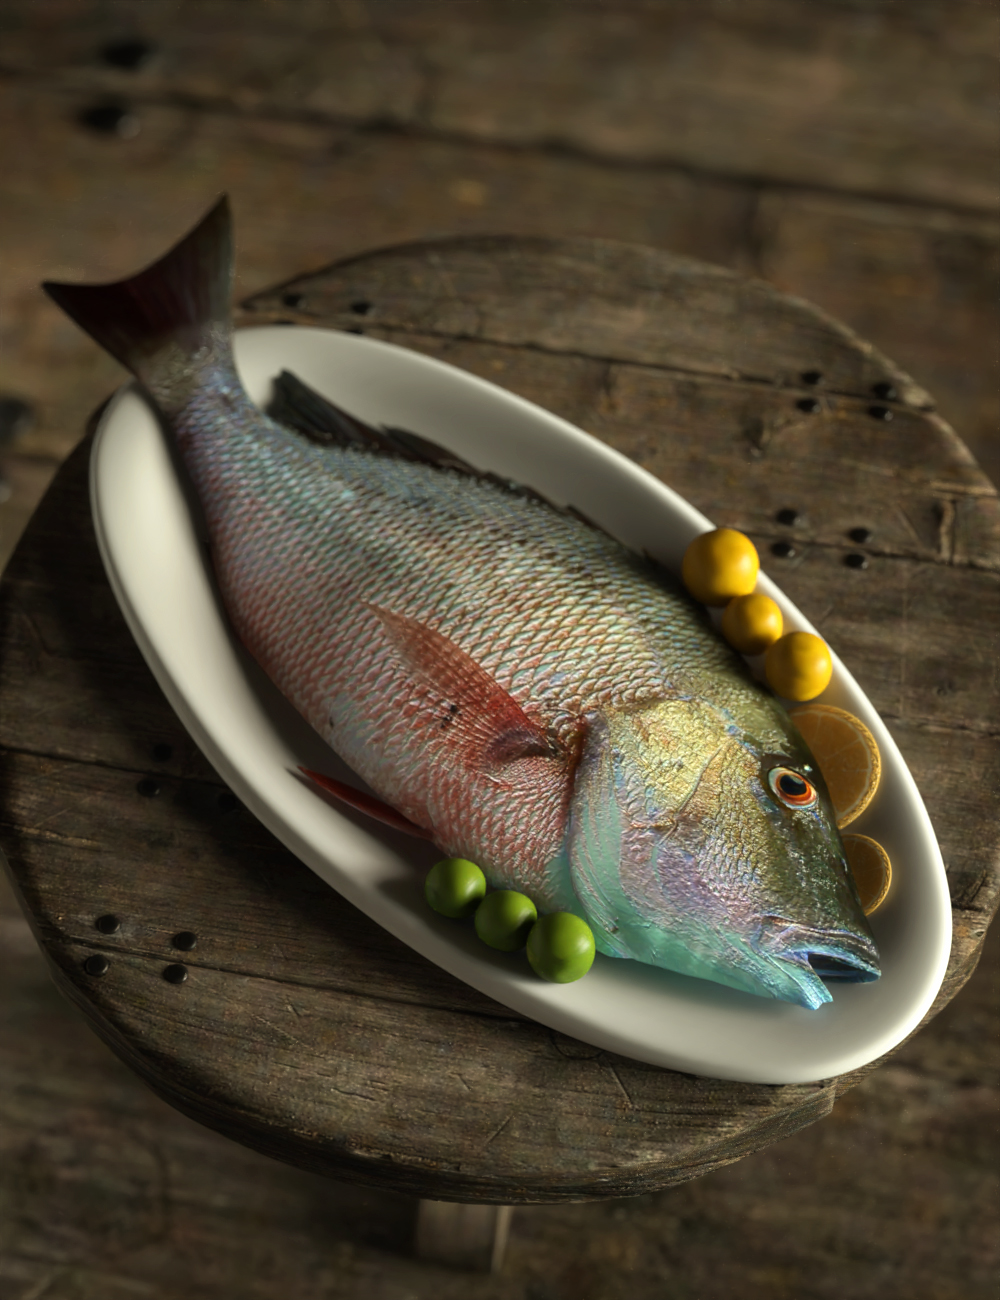 Food Dishes by: Feng, 3D Models by Daz 3D